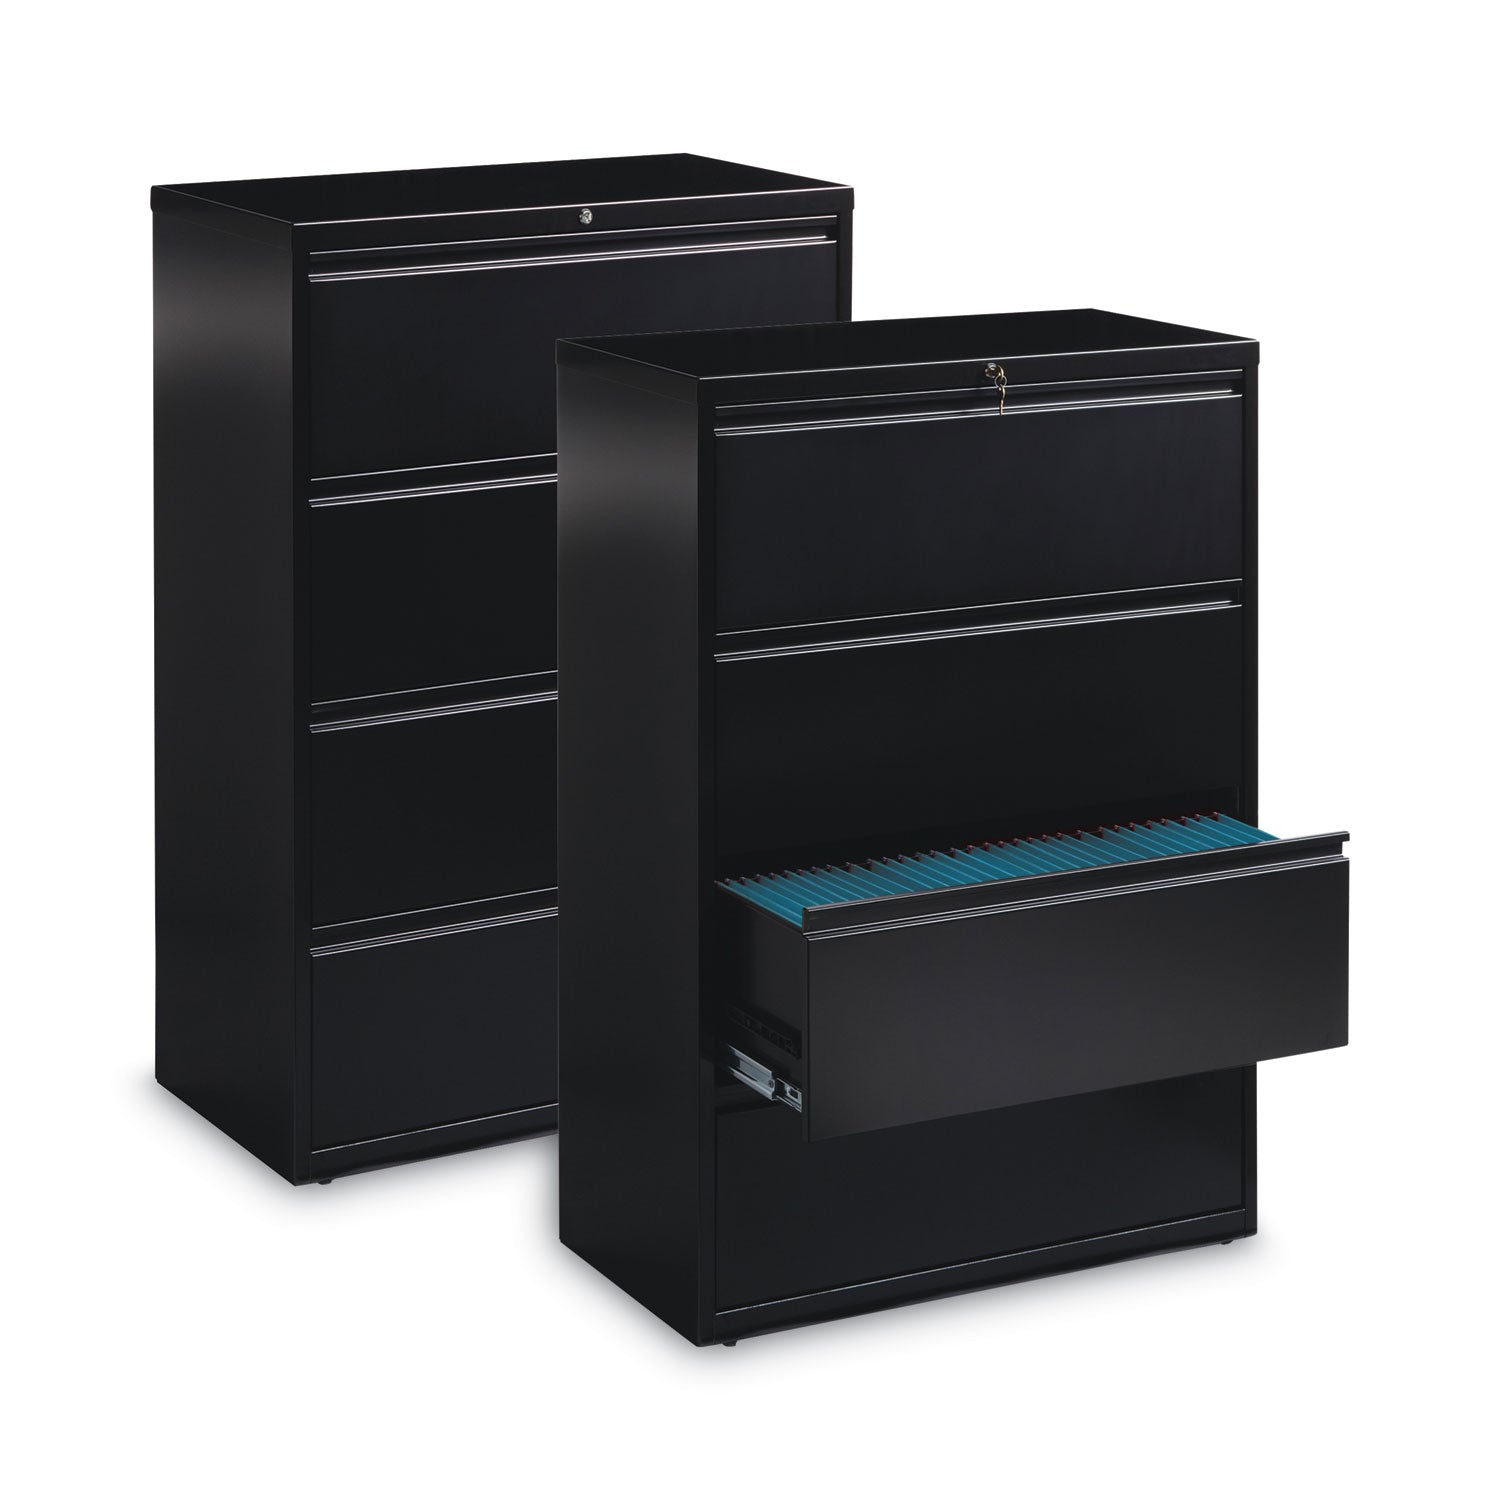 lateral-file-cabinet-4-letter-legal-a4-size-file-drawers-black-36-x-1862-x-525_hid14989 - 2